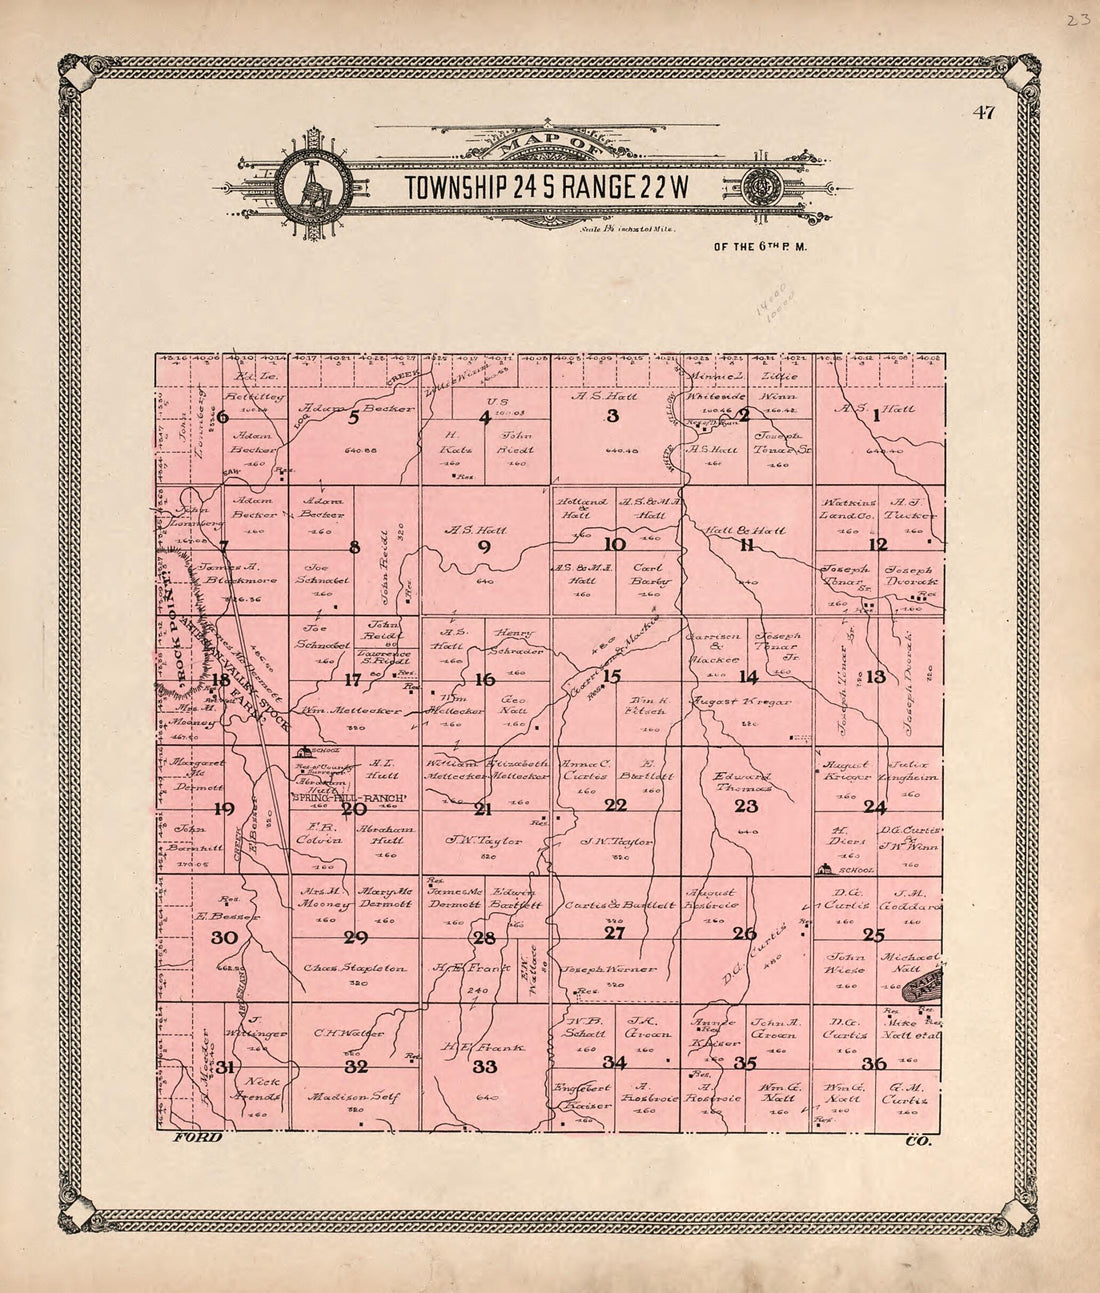 This old map of Map of Township 24 S Range 22 W from Standard Atlas of Hodgeman County, Kansas from 1907 was created by  Geo. A. Ogle &amp; Co in 1907